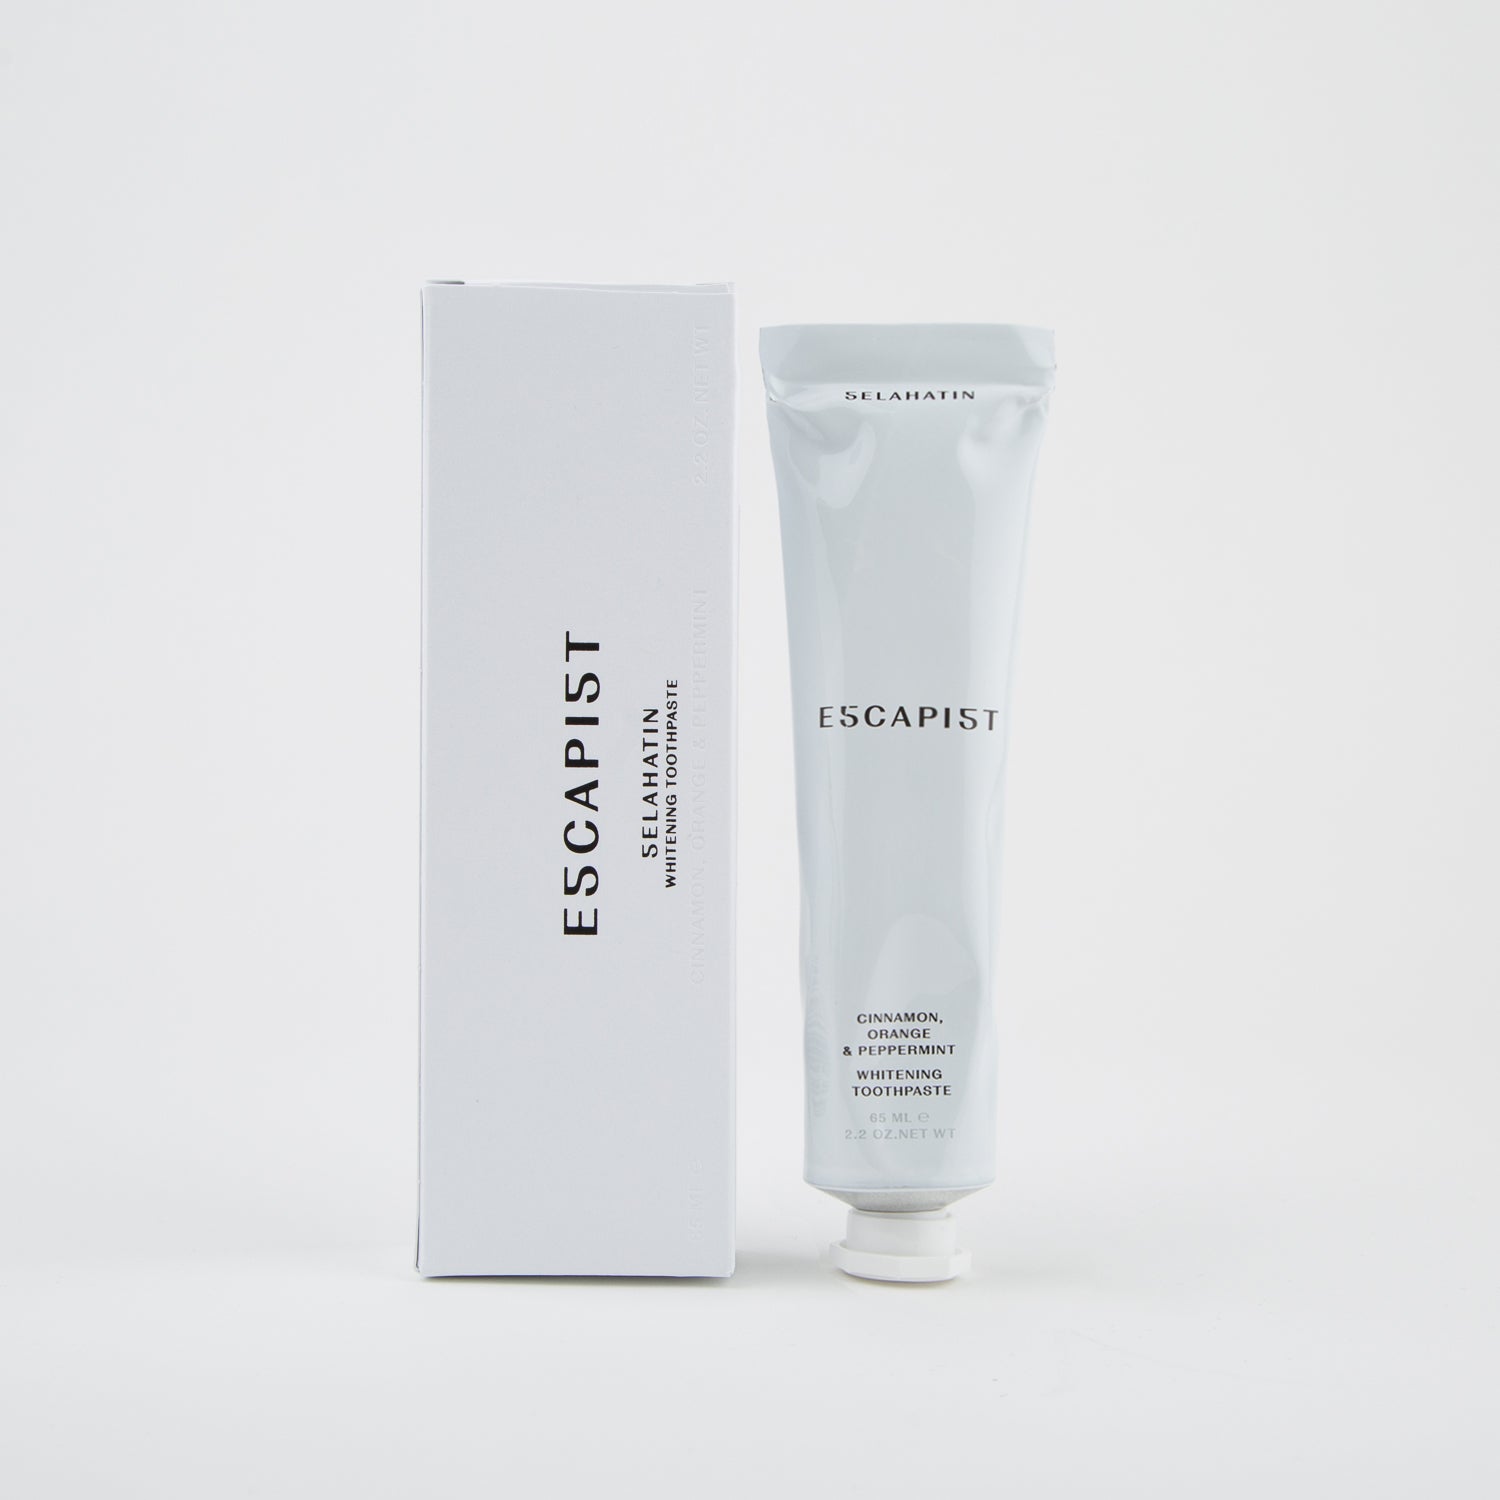 luxury beauty whitening toothpaste Escapist by Selahatin at Secret Location Concept Store